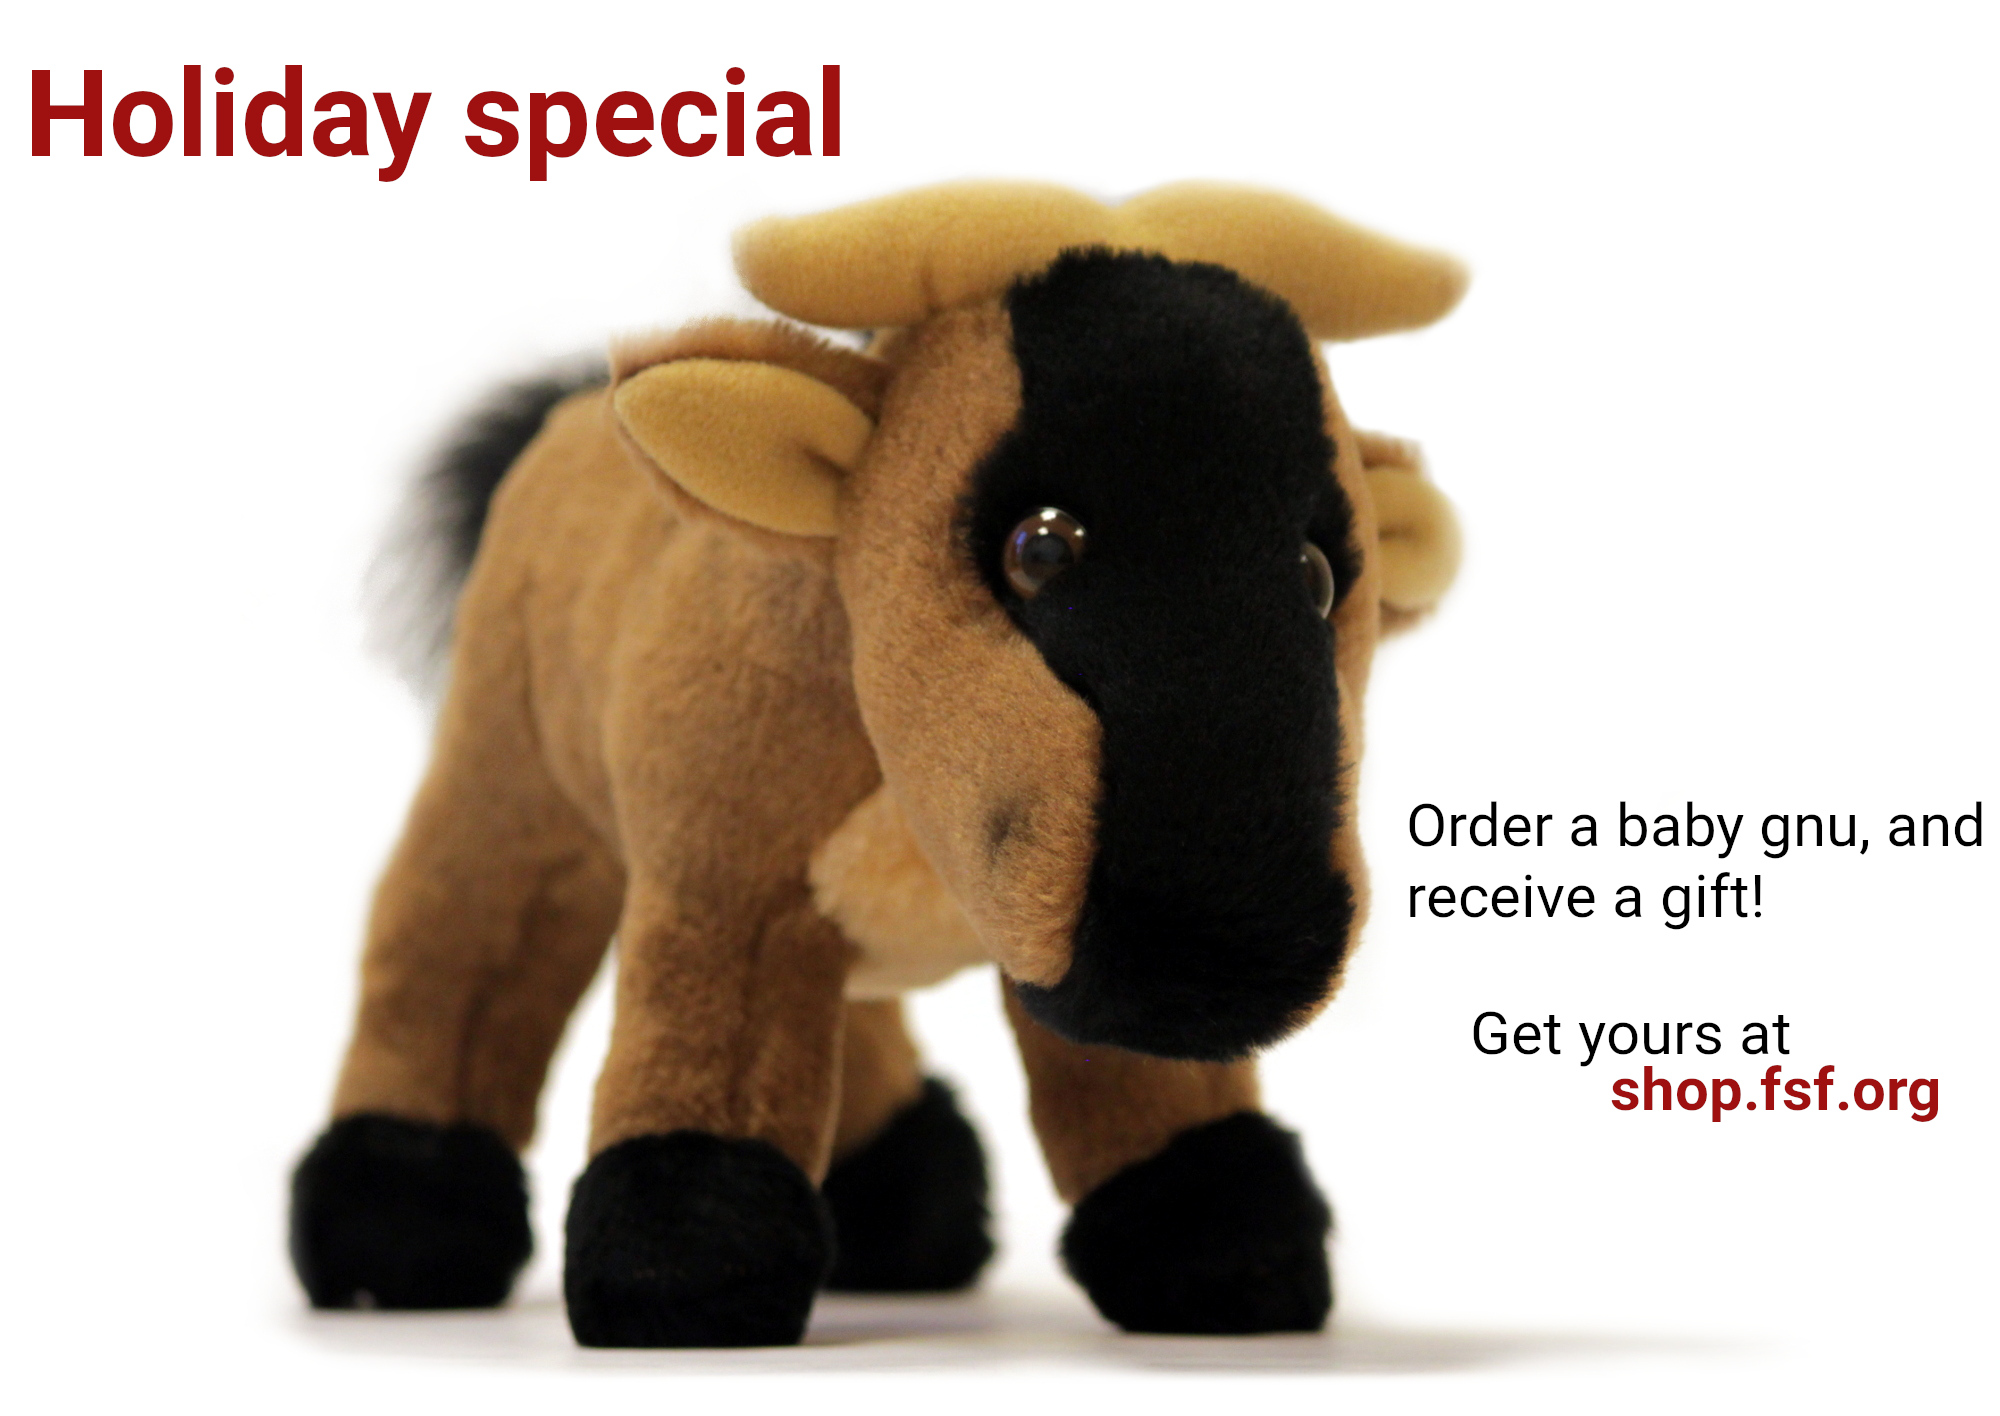 Baby GNU holiday special